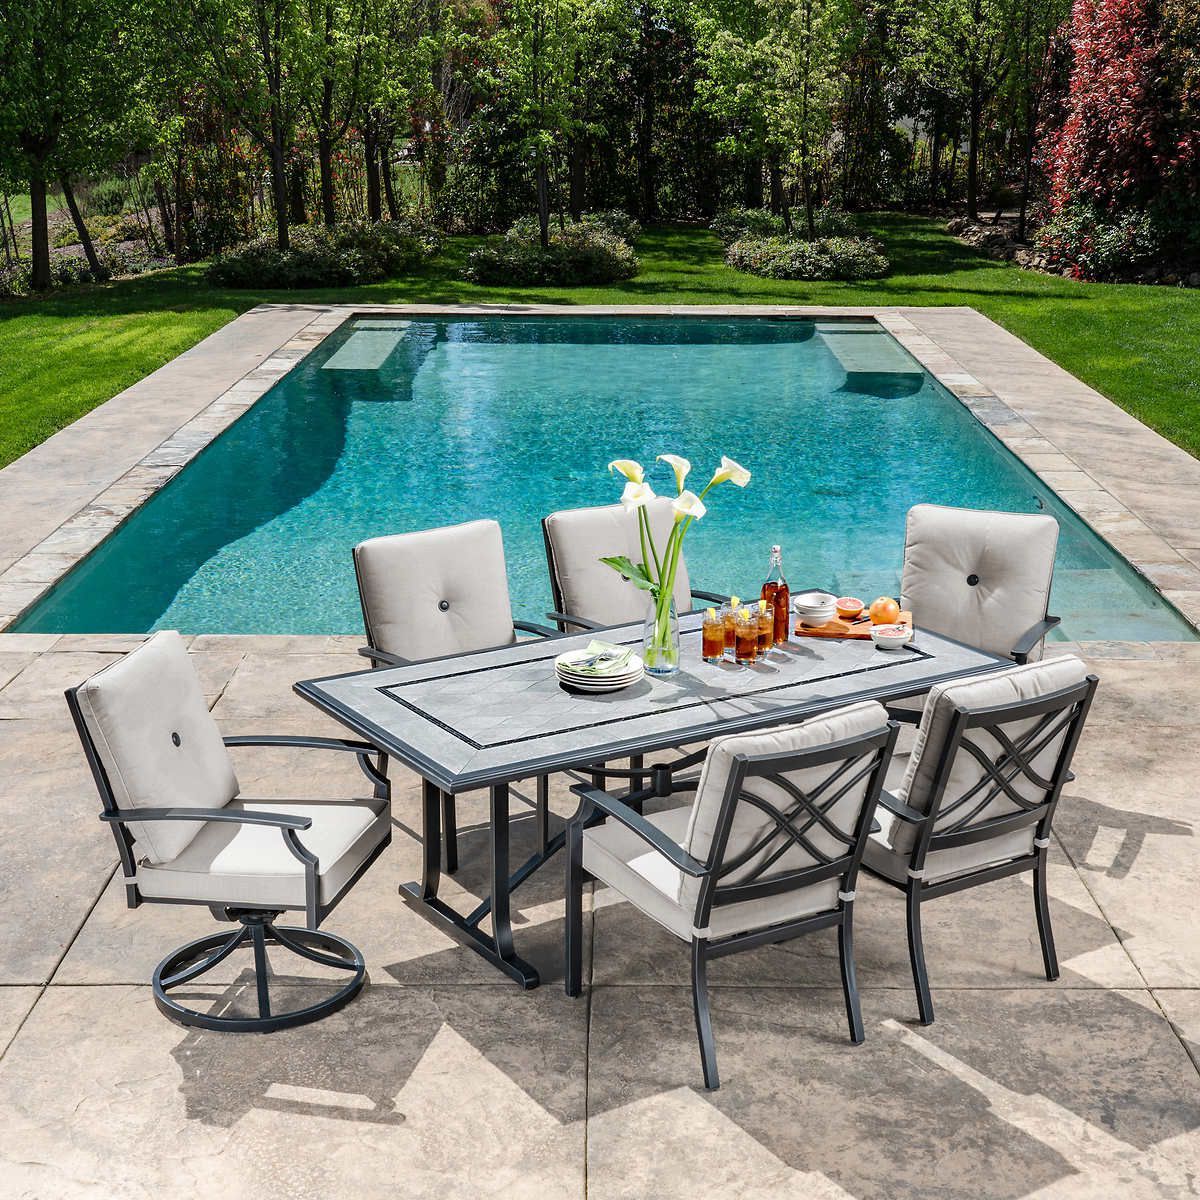 Famous 7 Piece Rectangular Patio Dining Sets With Hamilton 7 Piece Cushion Dining Set In  (View 10 of 15)